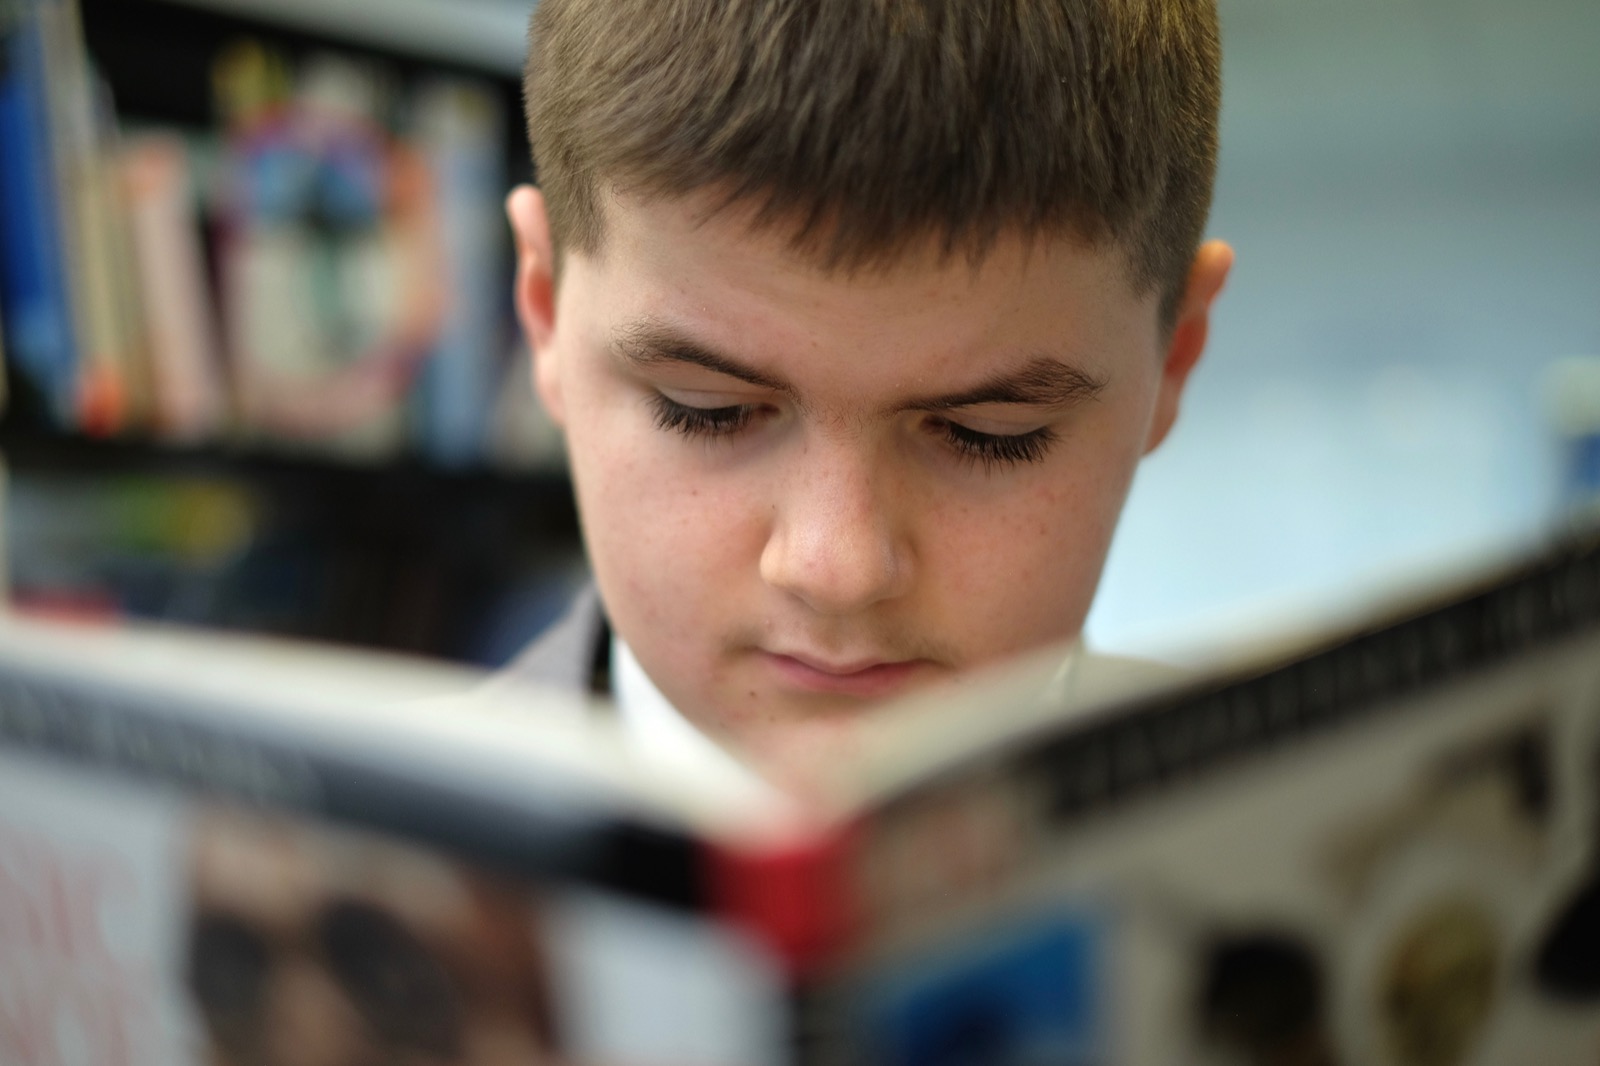 03 New Study Highlights Importance Of Reading To Whole Curriculum